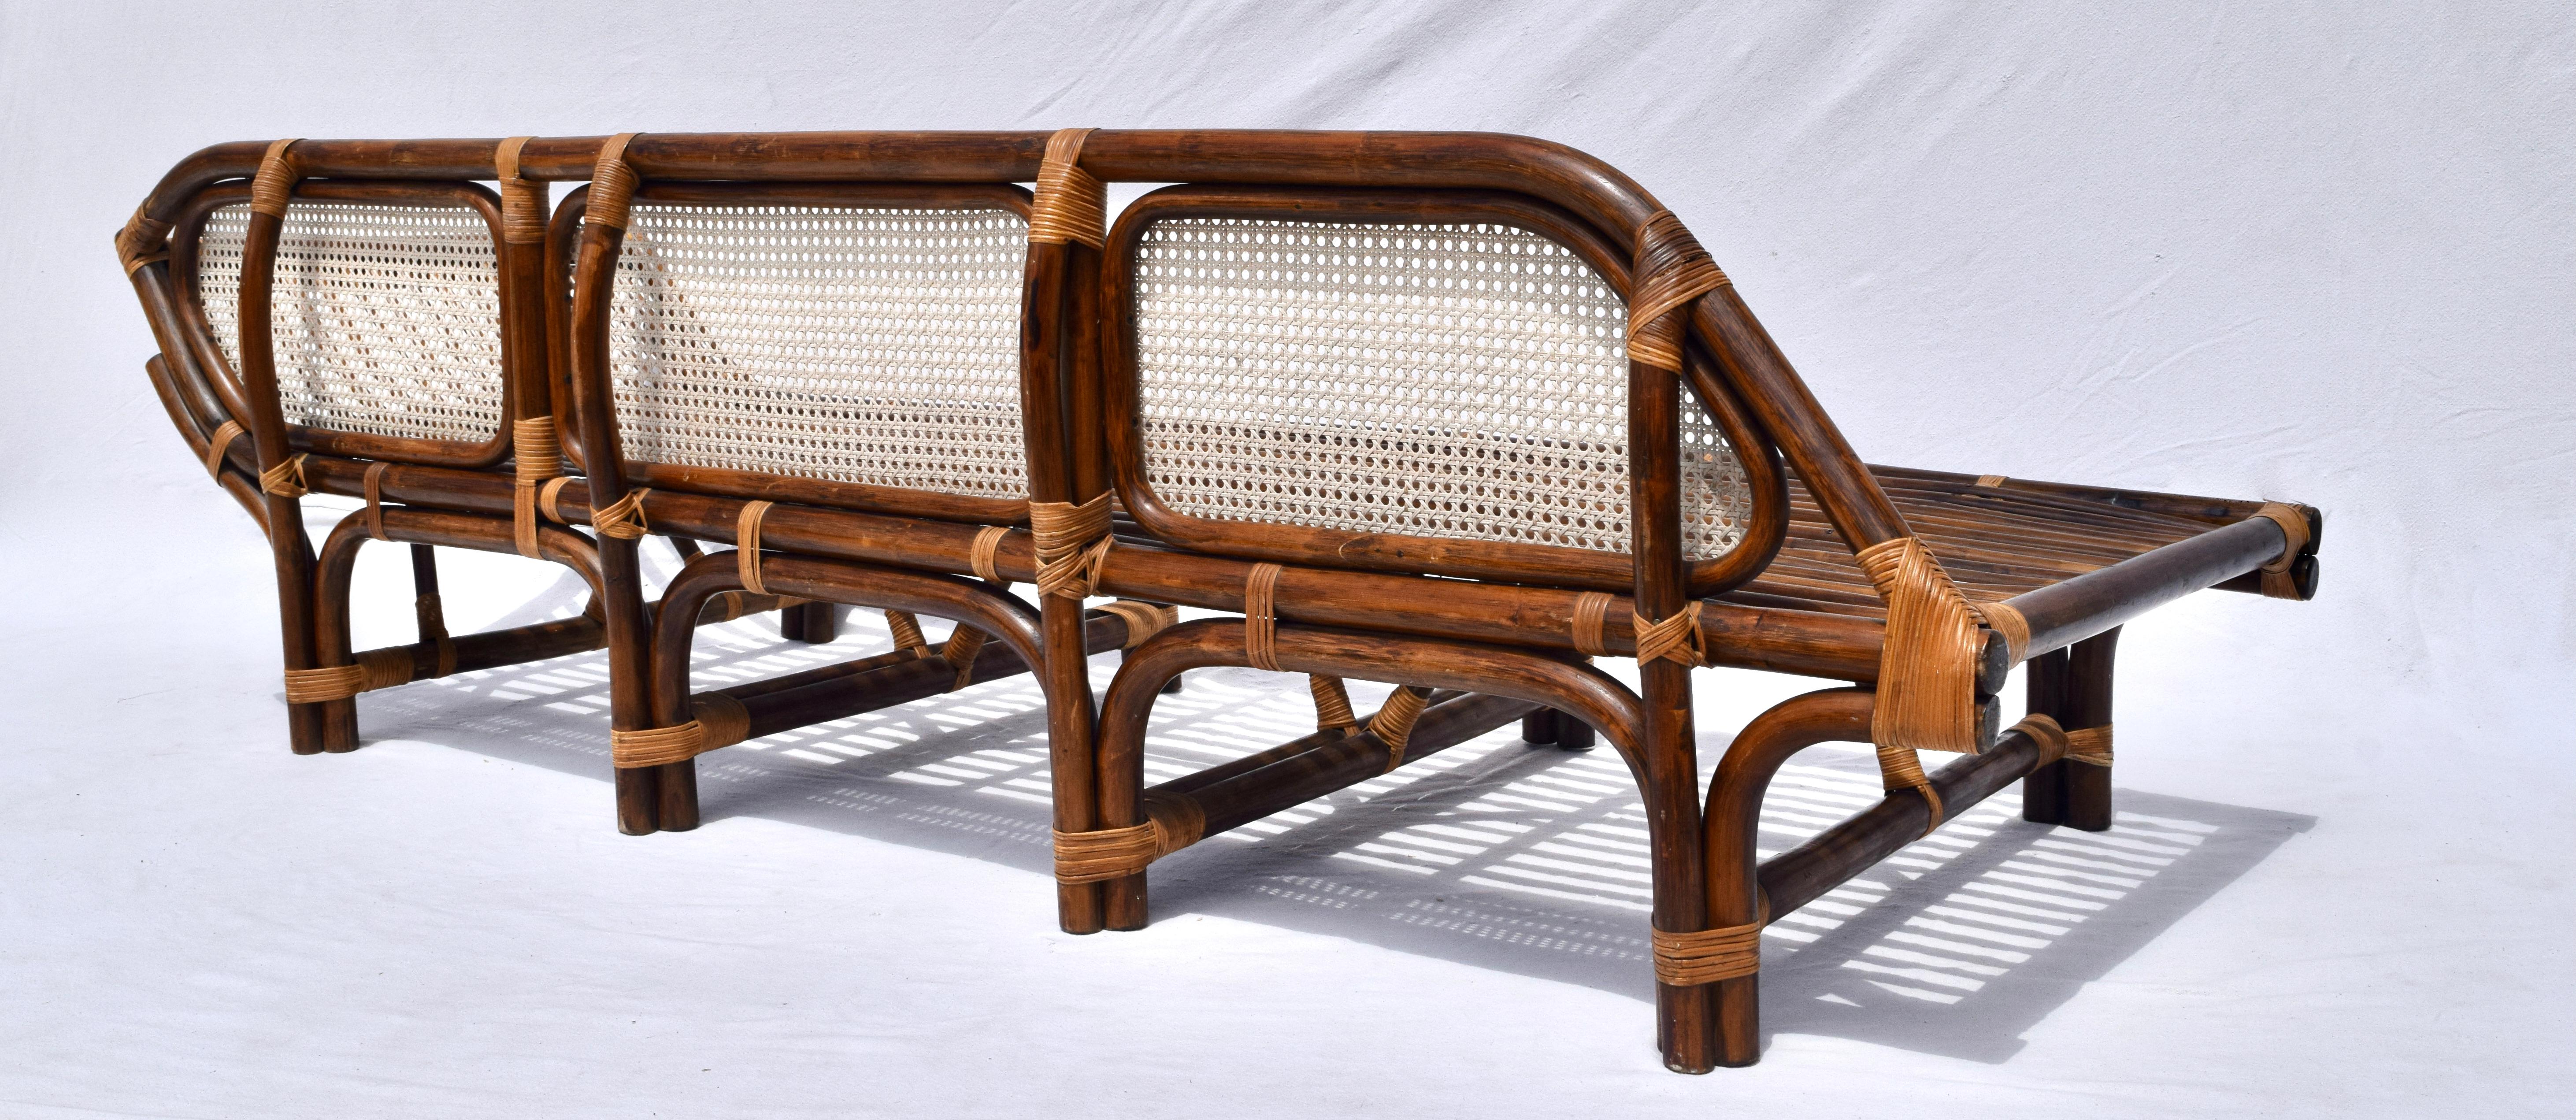 1980's, Bamboo Rattan Caned Daybed Chaise Lounge 4